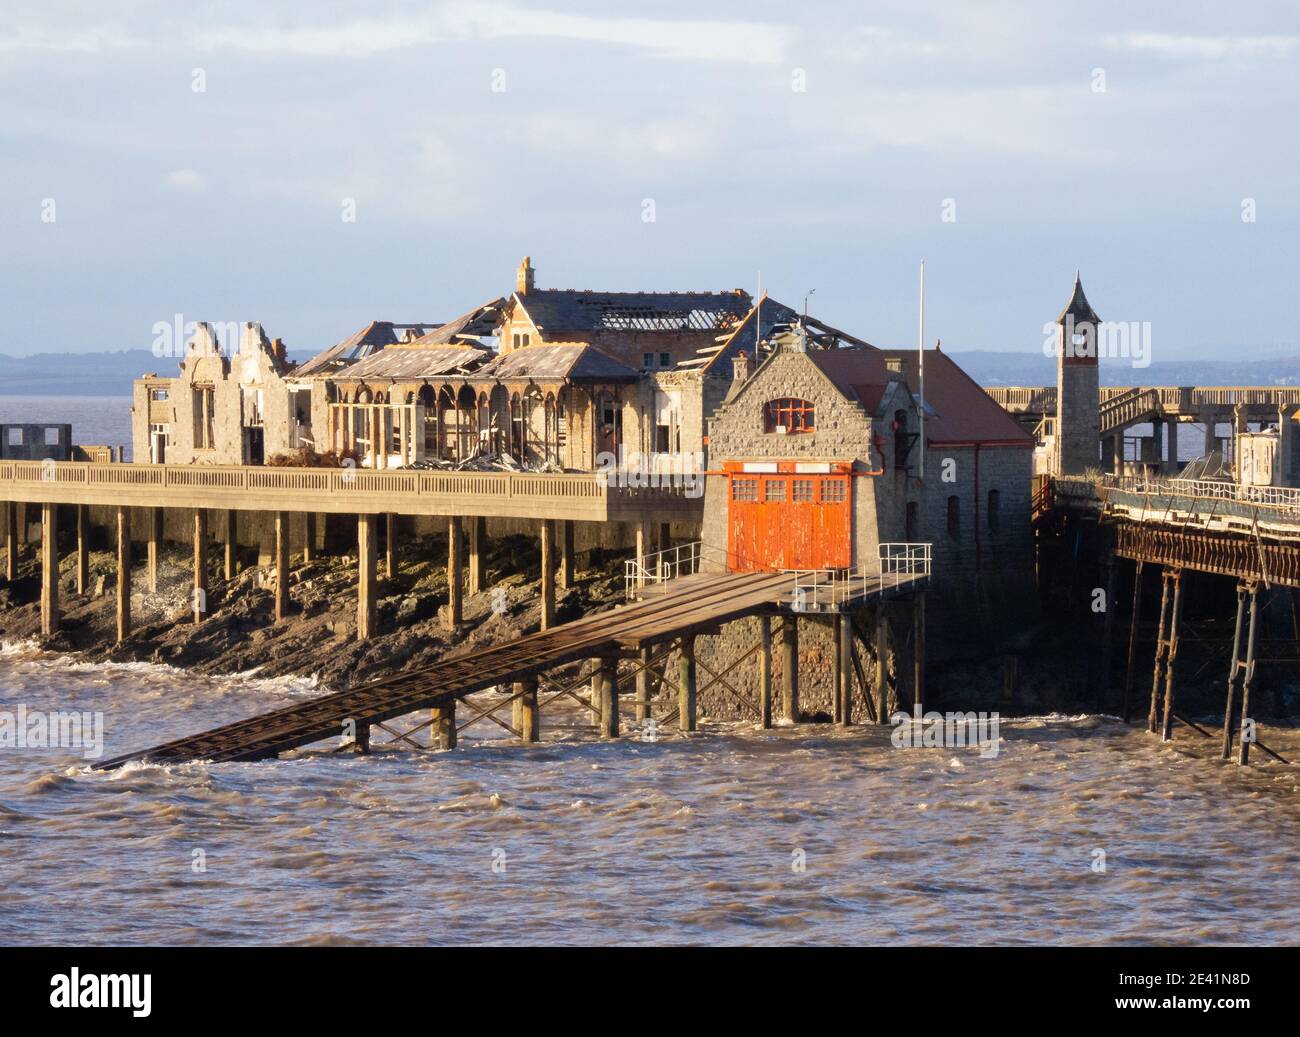 Derelict shell of the once thriving Birnbeck Pier in Weston super Mare on the Somerset coast UK Stock Photo